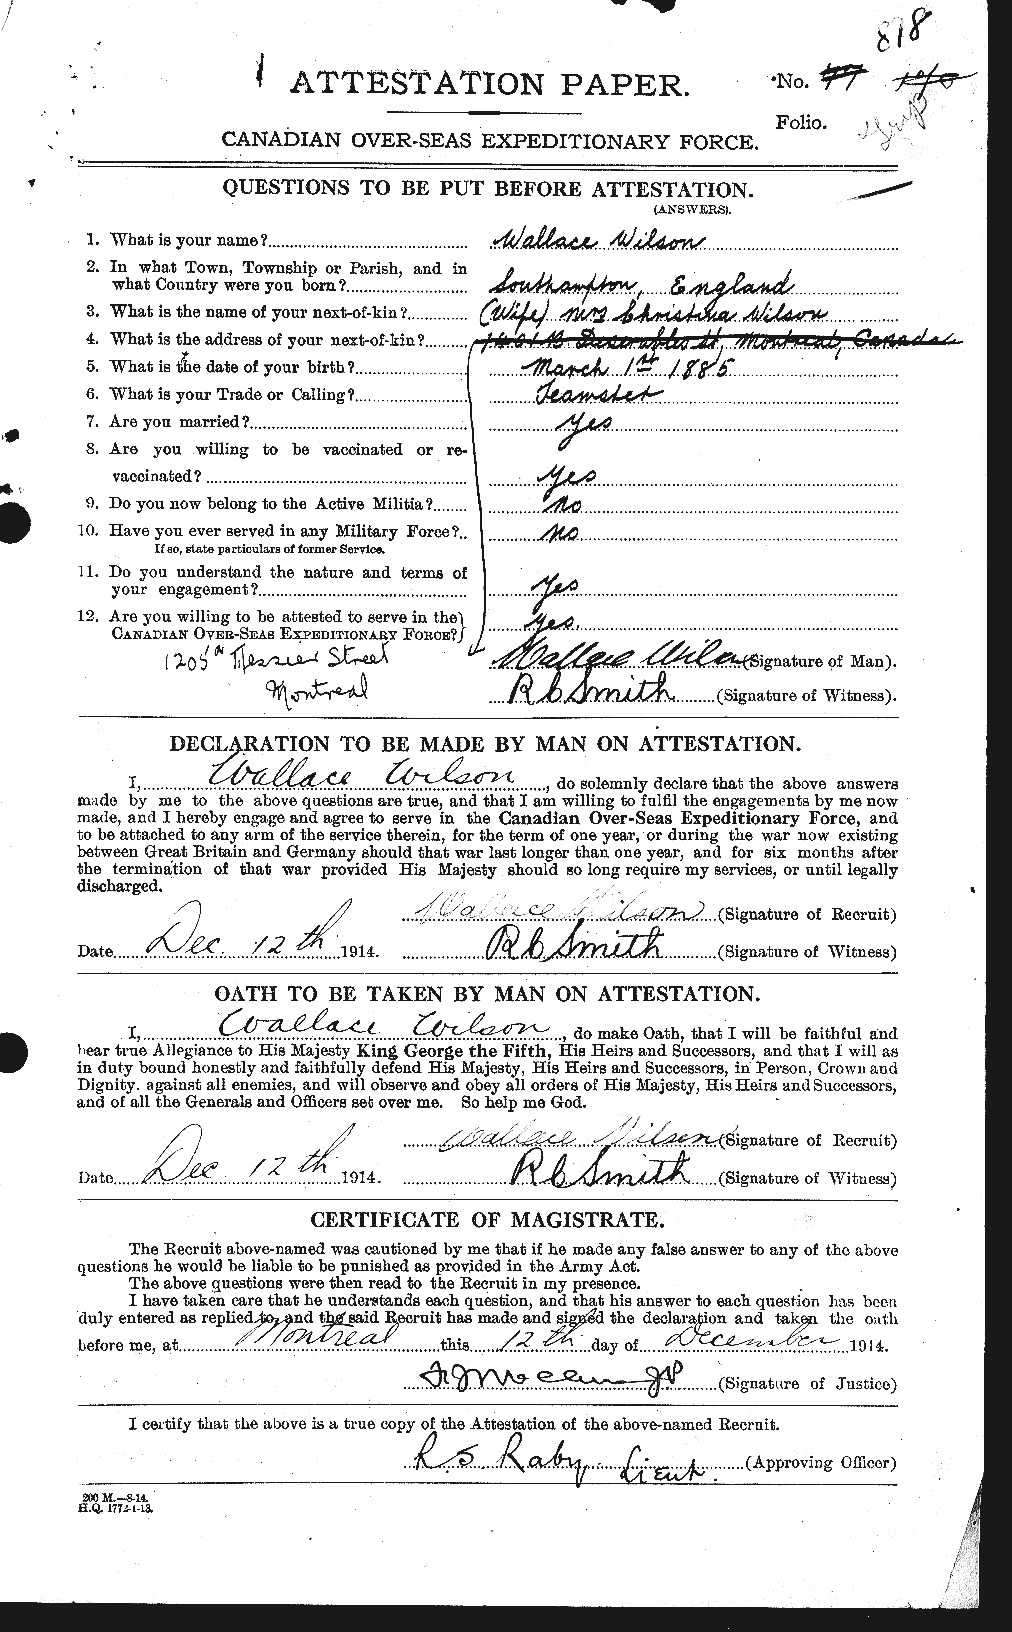 Personnel Records of the First World War - CEF 681720a